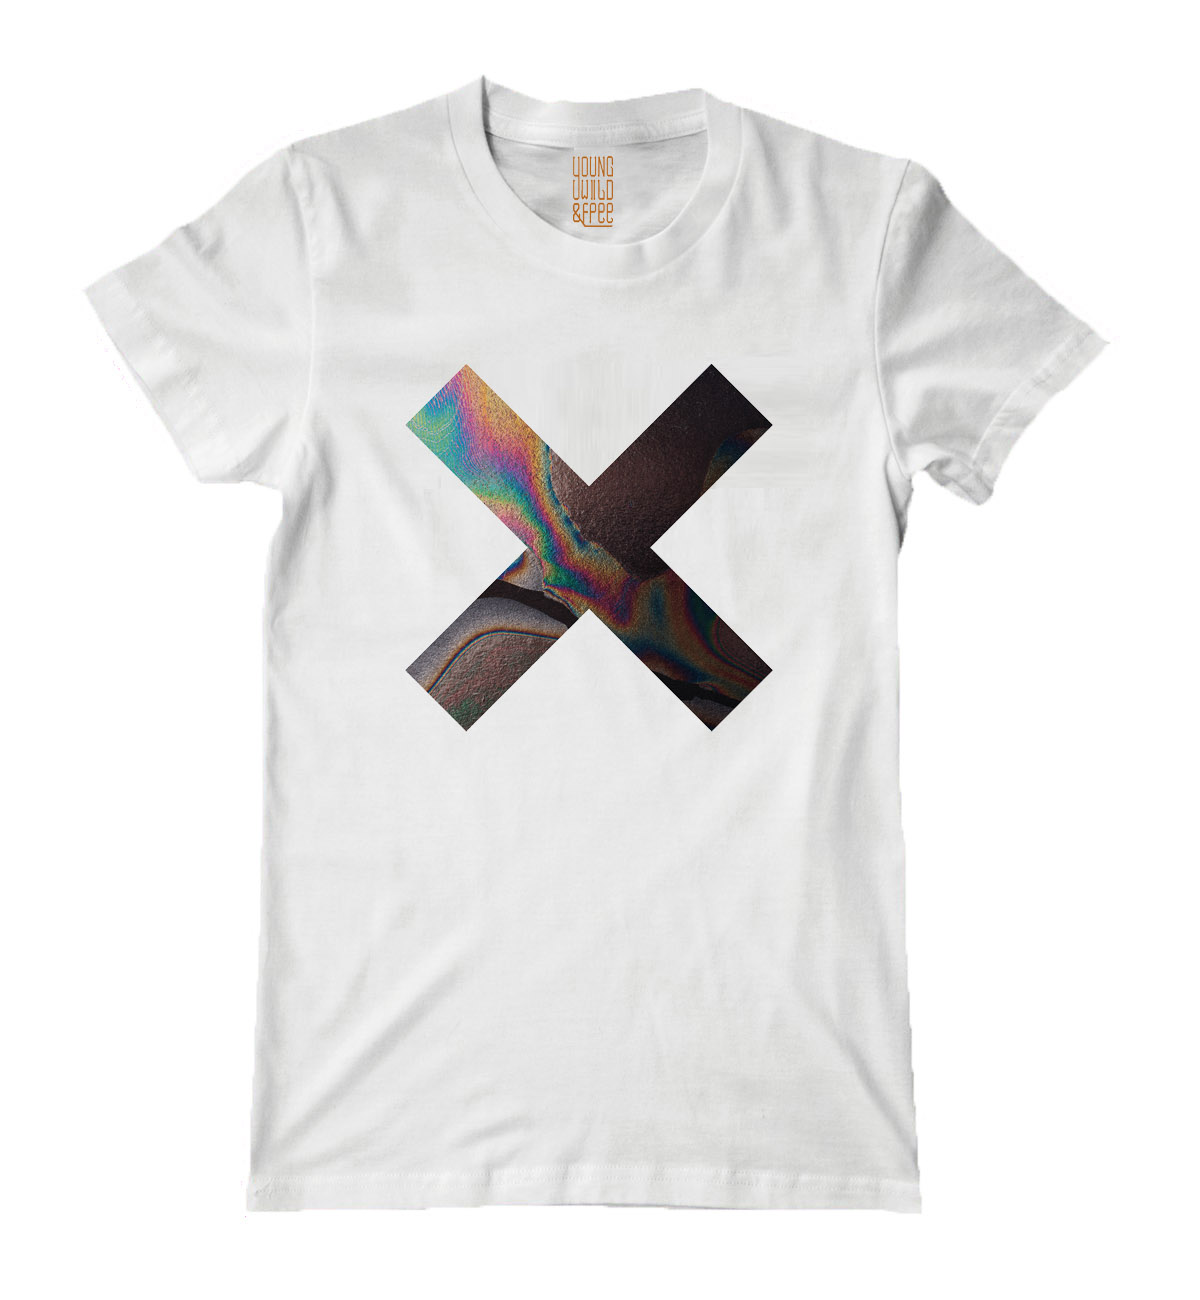 Buy The XX T-shirts, Merchandise, Gifts Collectibles - Idolstore